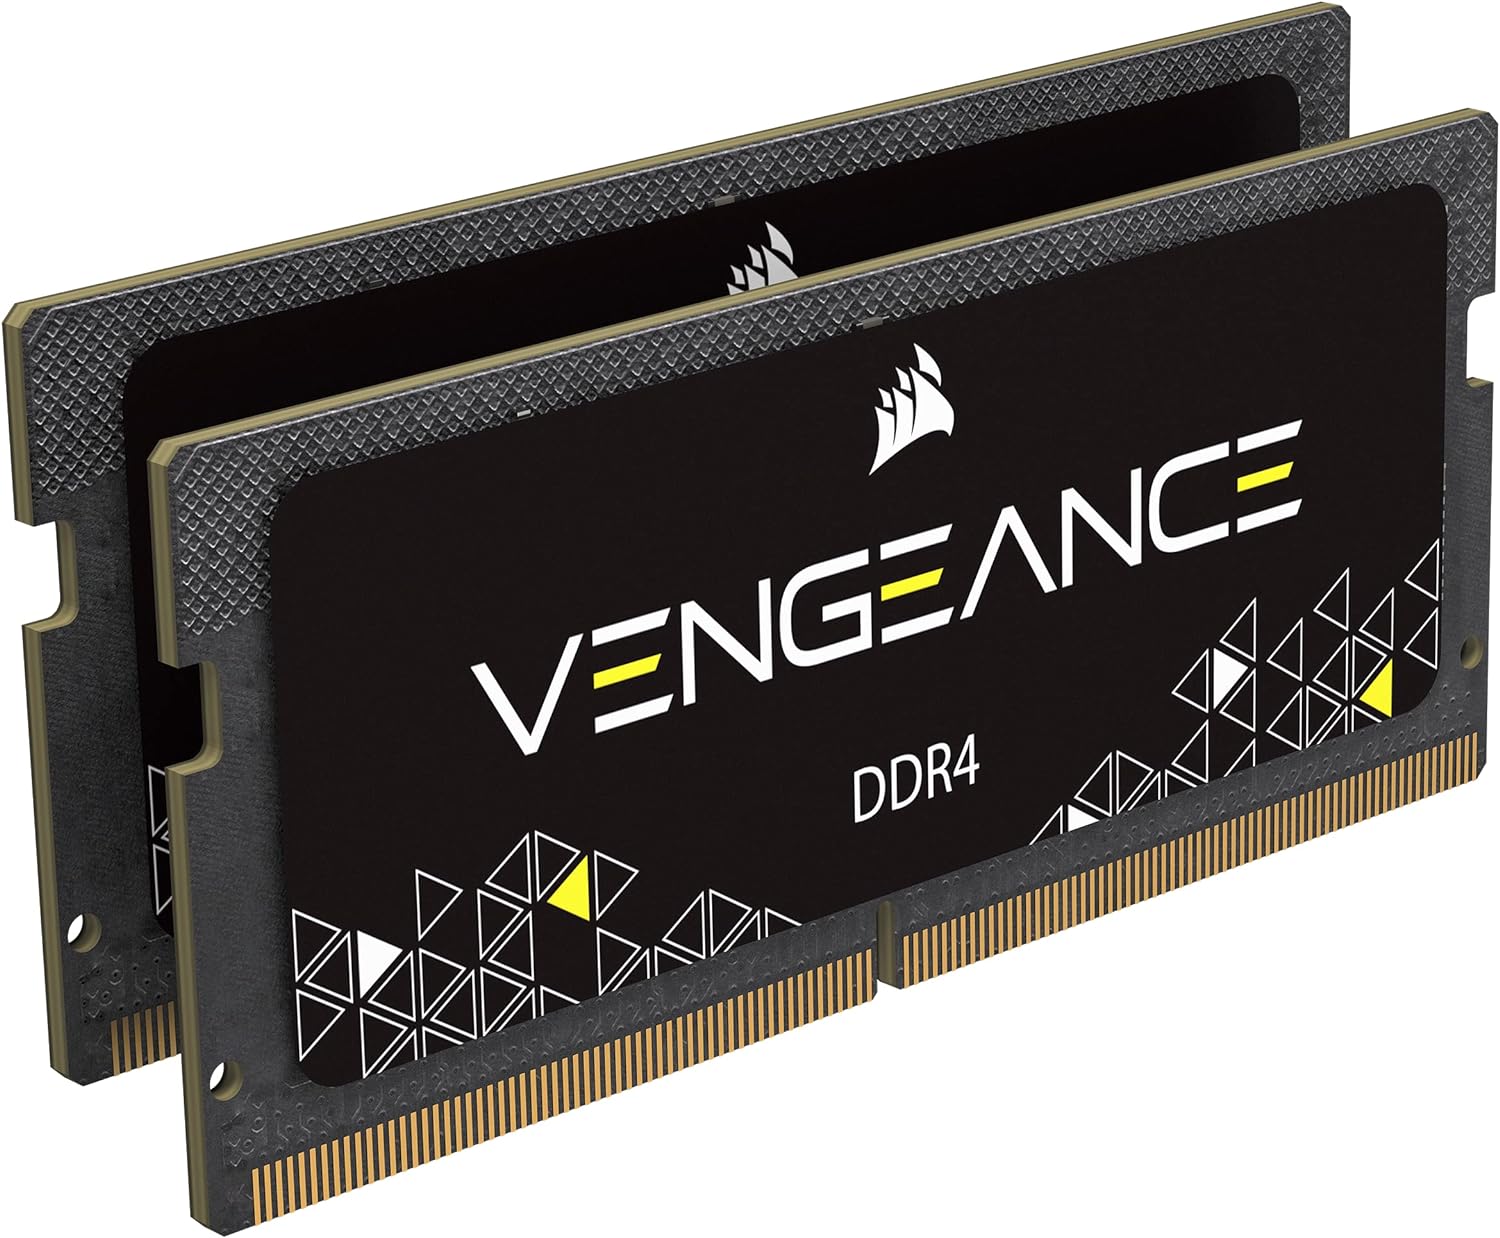 Corsair Vengeance Performance SODIMM Memory 32GB (2x16GB) DDR4 3200MHz CL22 Unbuffered for 8th Generation or Newer Intel Core™ i7, and AMD Ryzen 4000 Series Notebooks